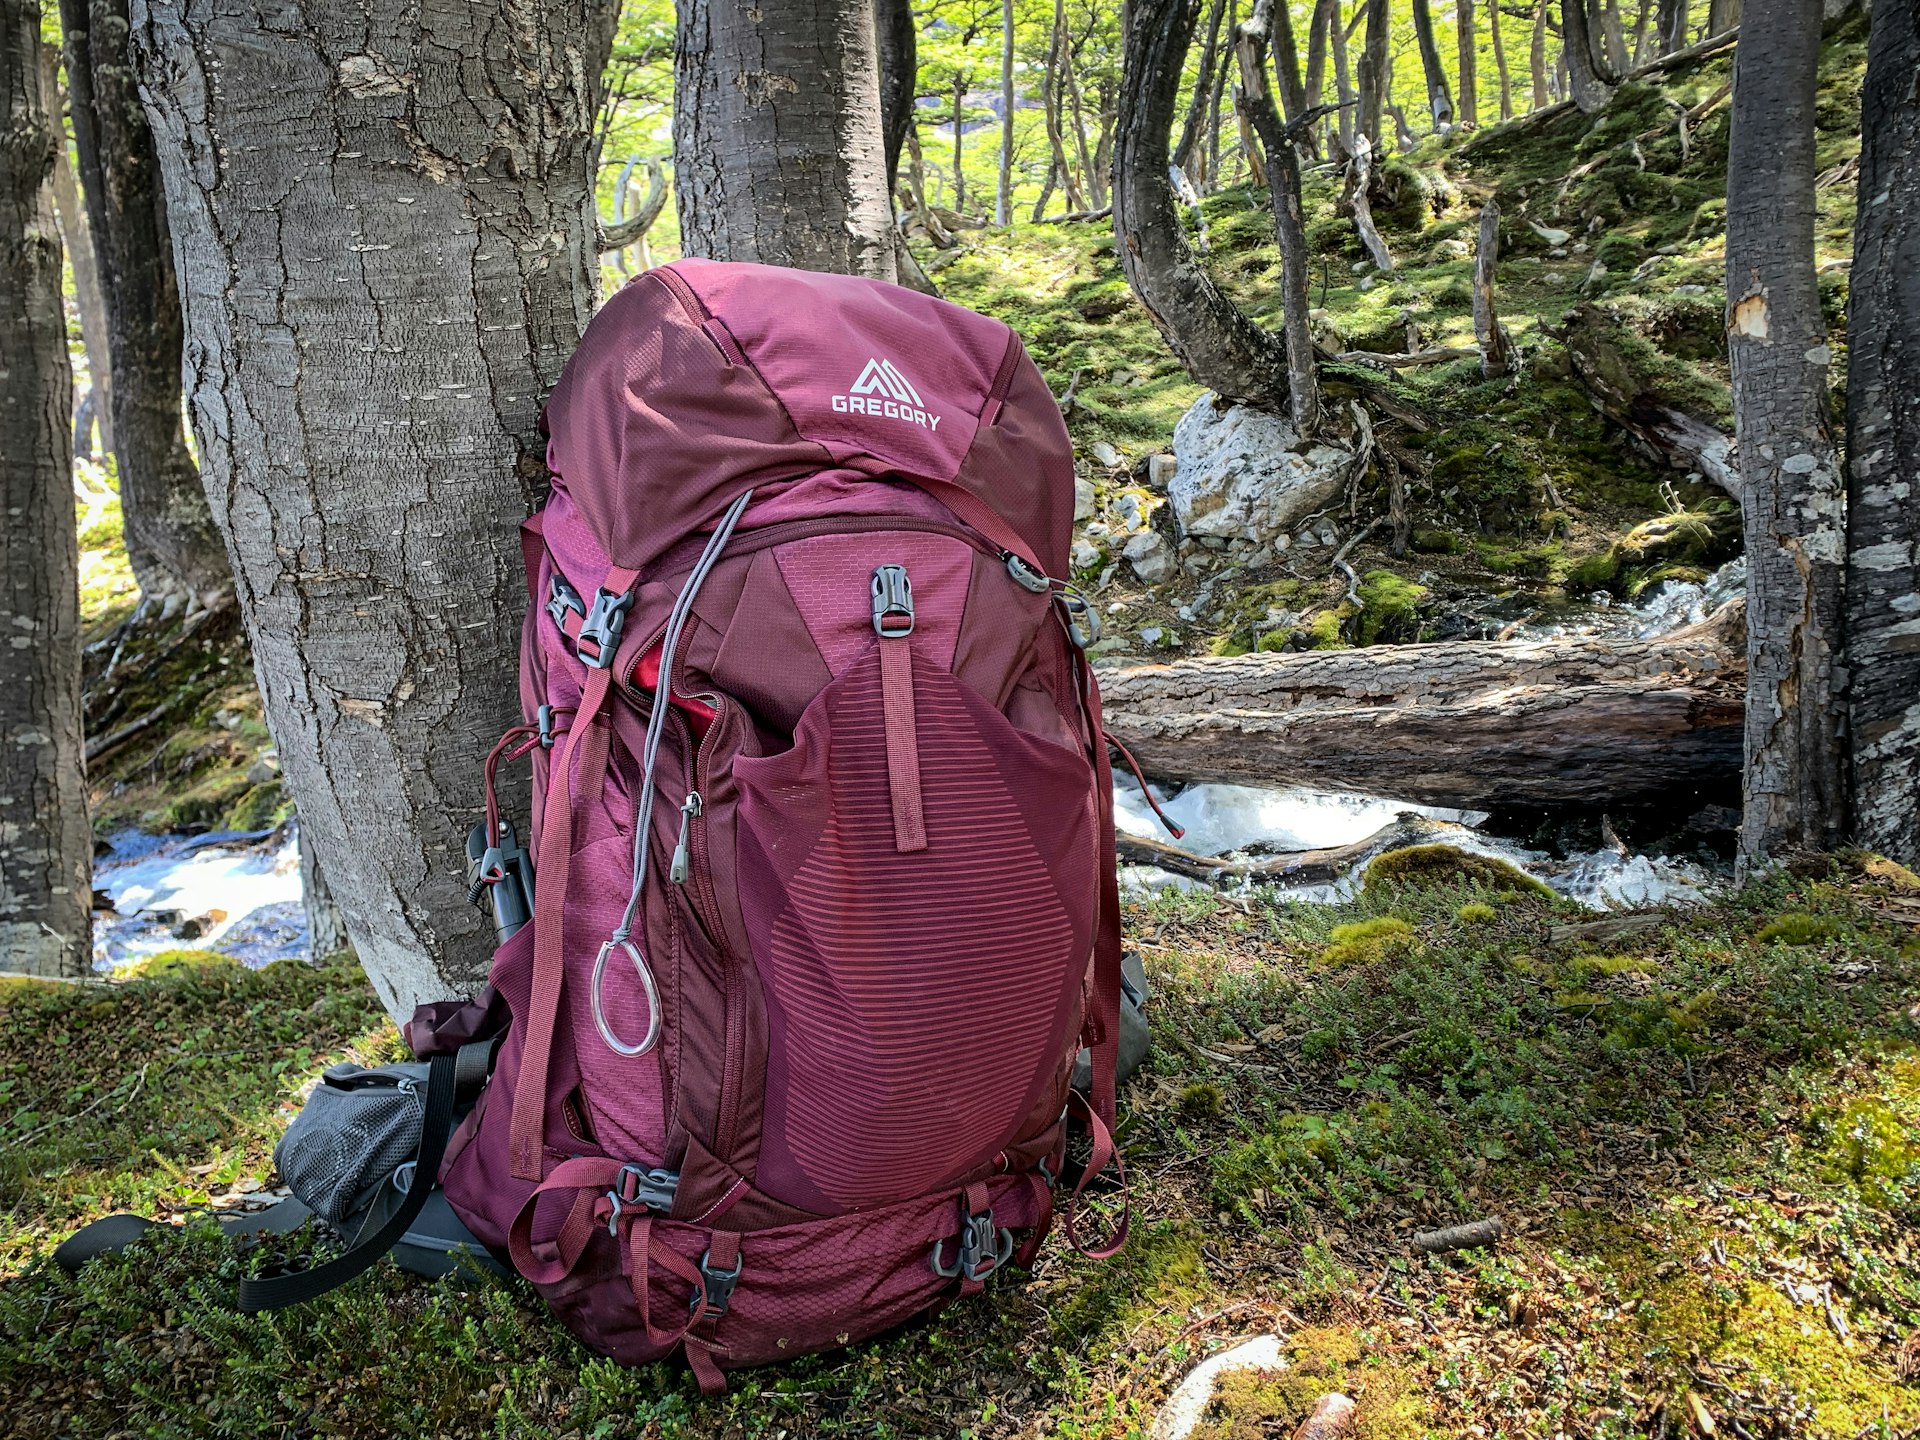 A purple backpack leaning against a tree in a forest